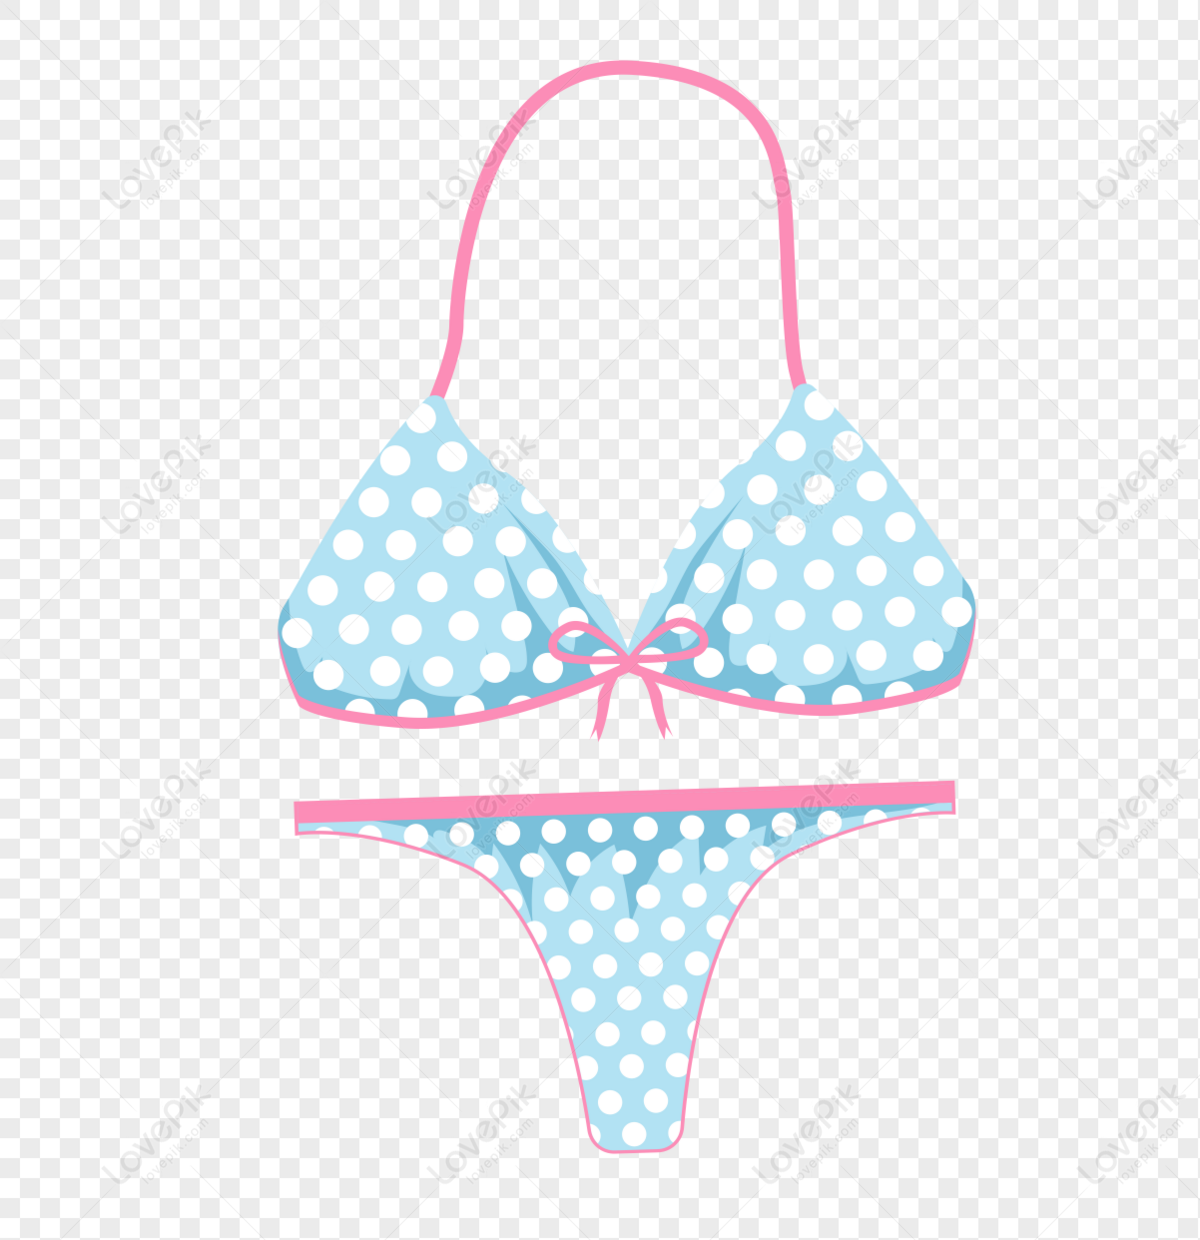 lip Verstrooien schermutseling Bikini Icon Free Vector Illustration Material PNG Free Download And Clipart  Image For Free Download - Lovepik | 401336203